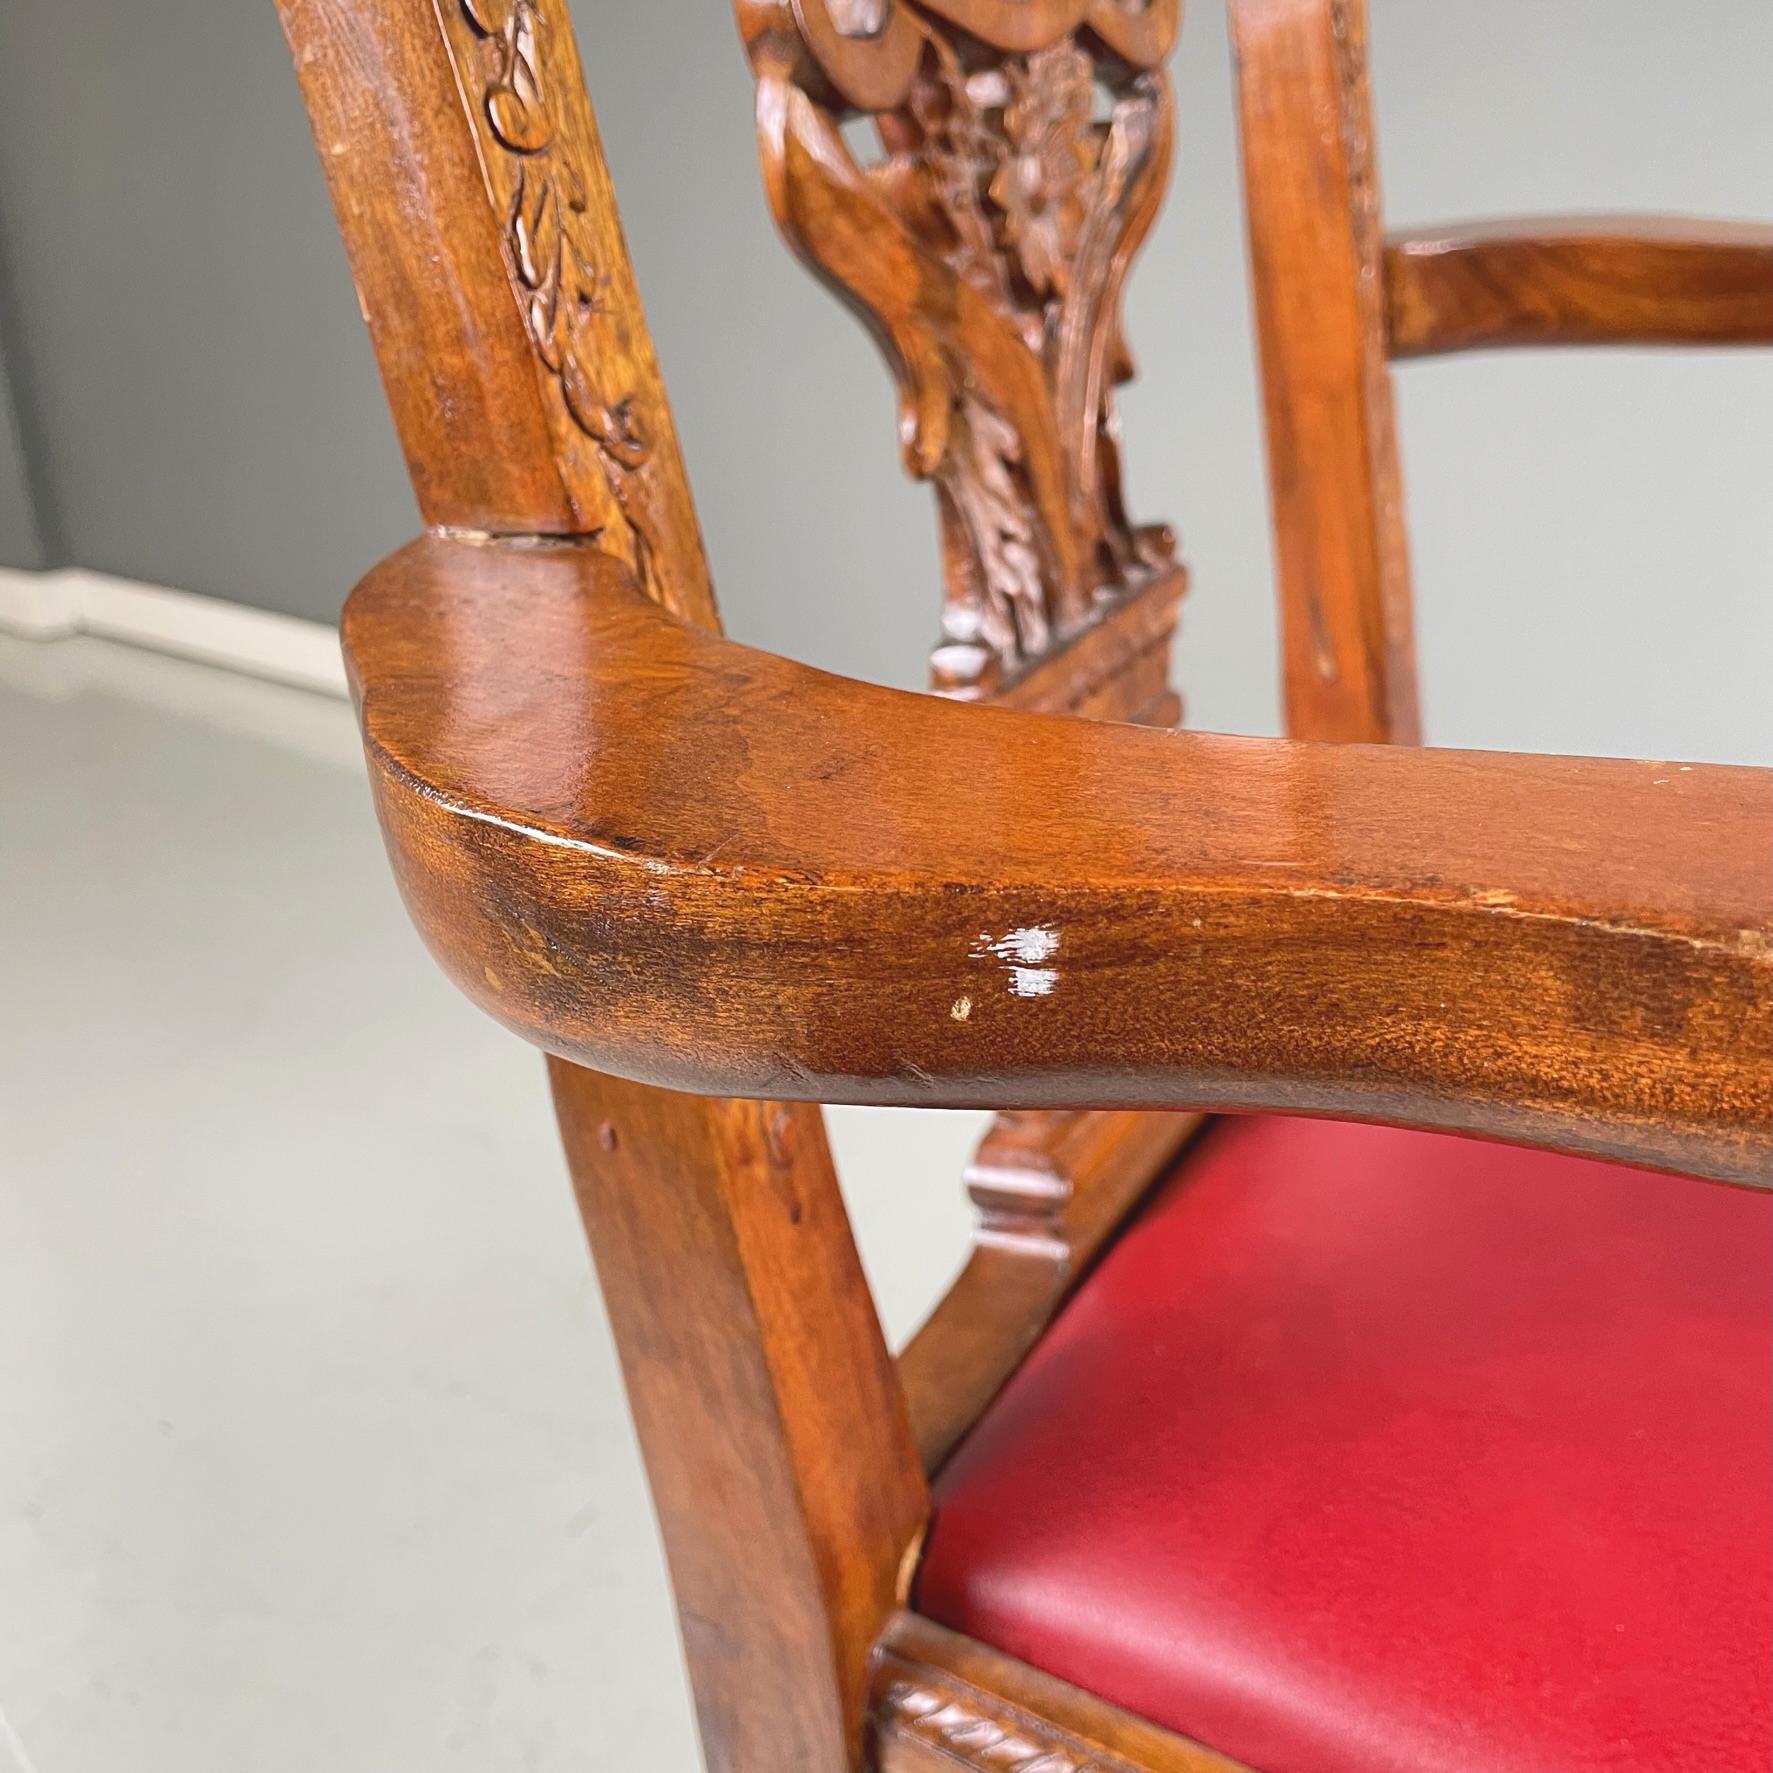 Chippendale Style Wooden Chairs with Red Leather, Early 1900s For Sale 10